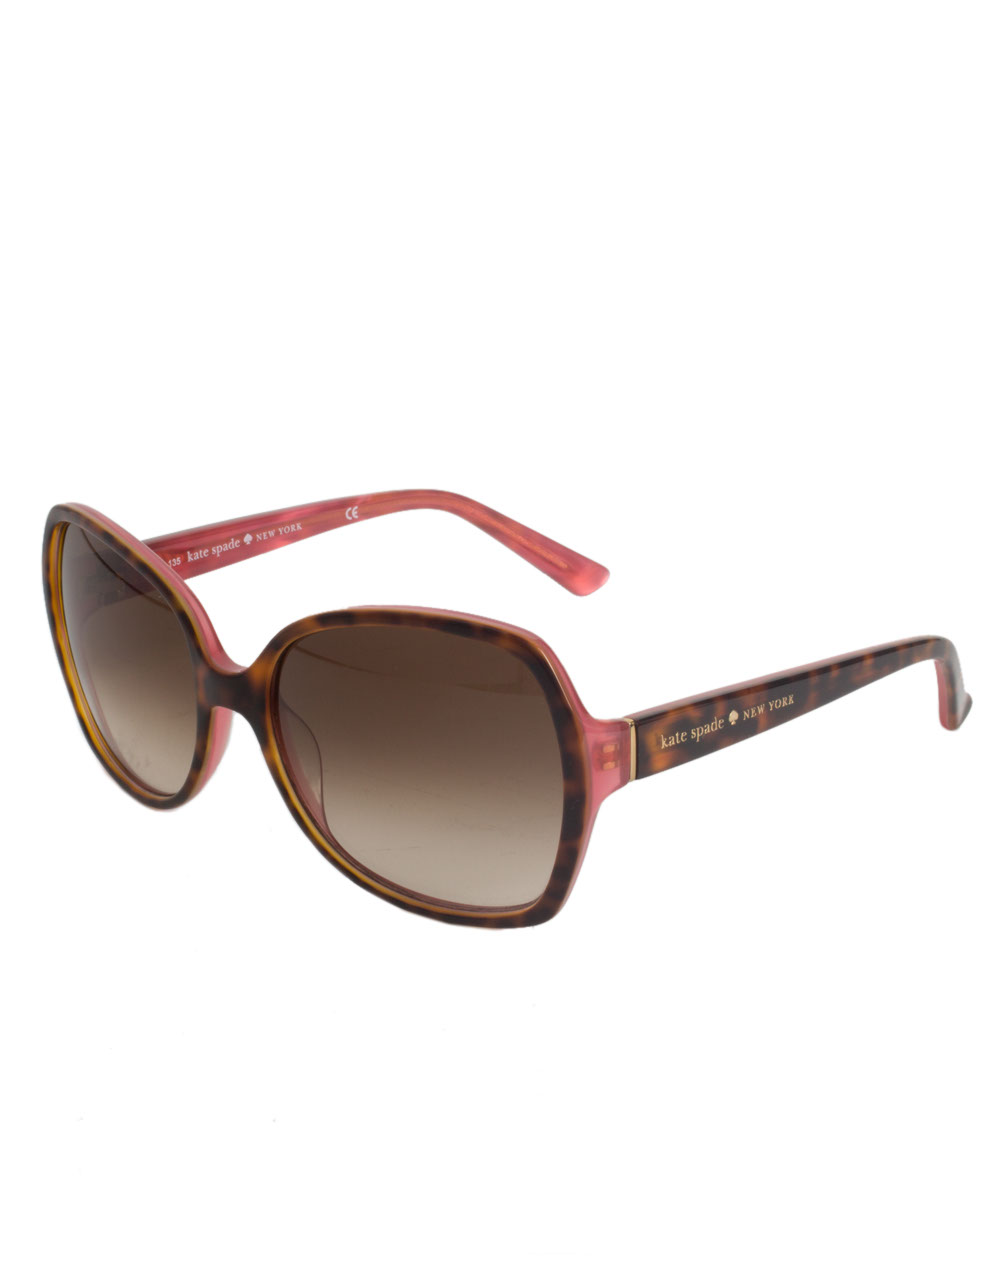 Kate Spade Halsey Square Sunglasses in Red (tortoise pink) | Lyst